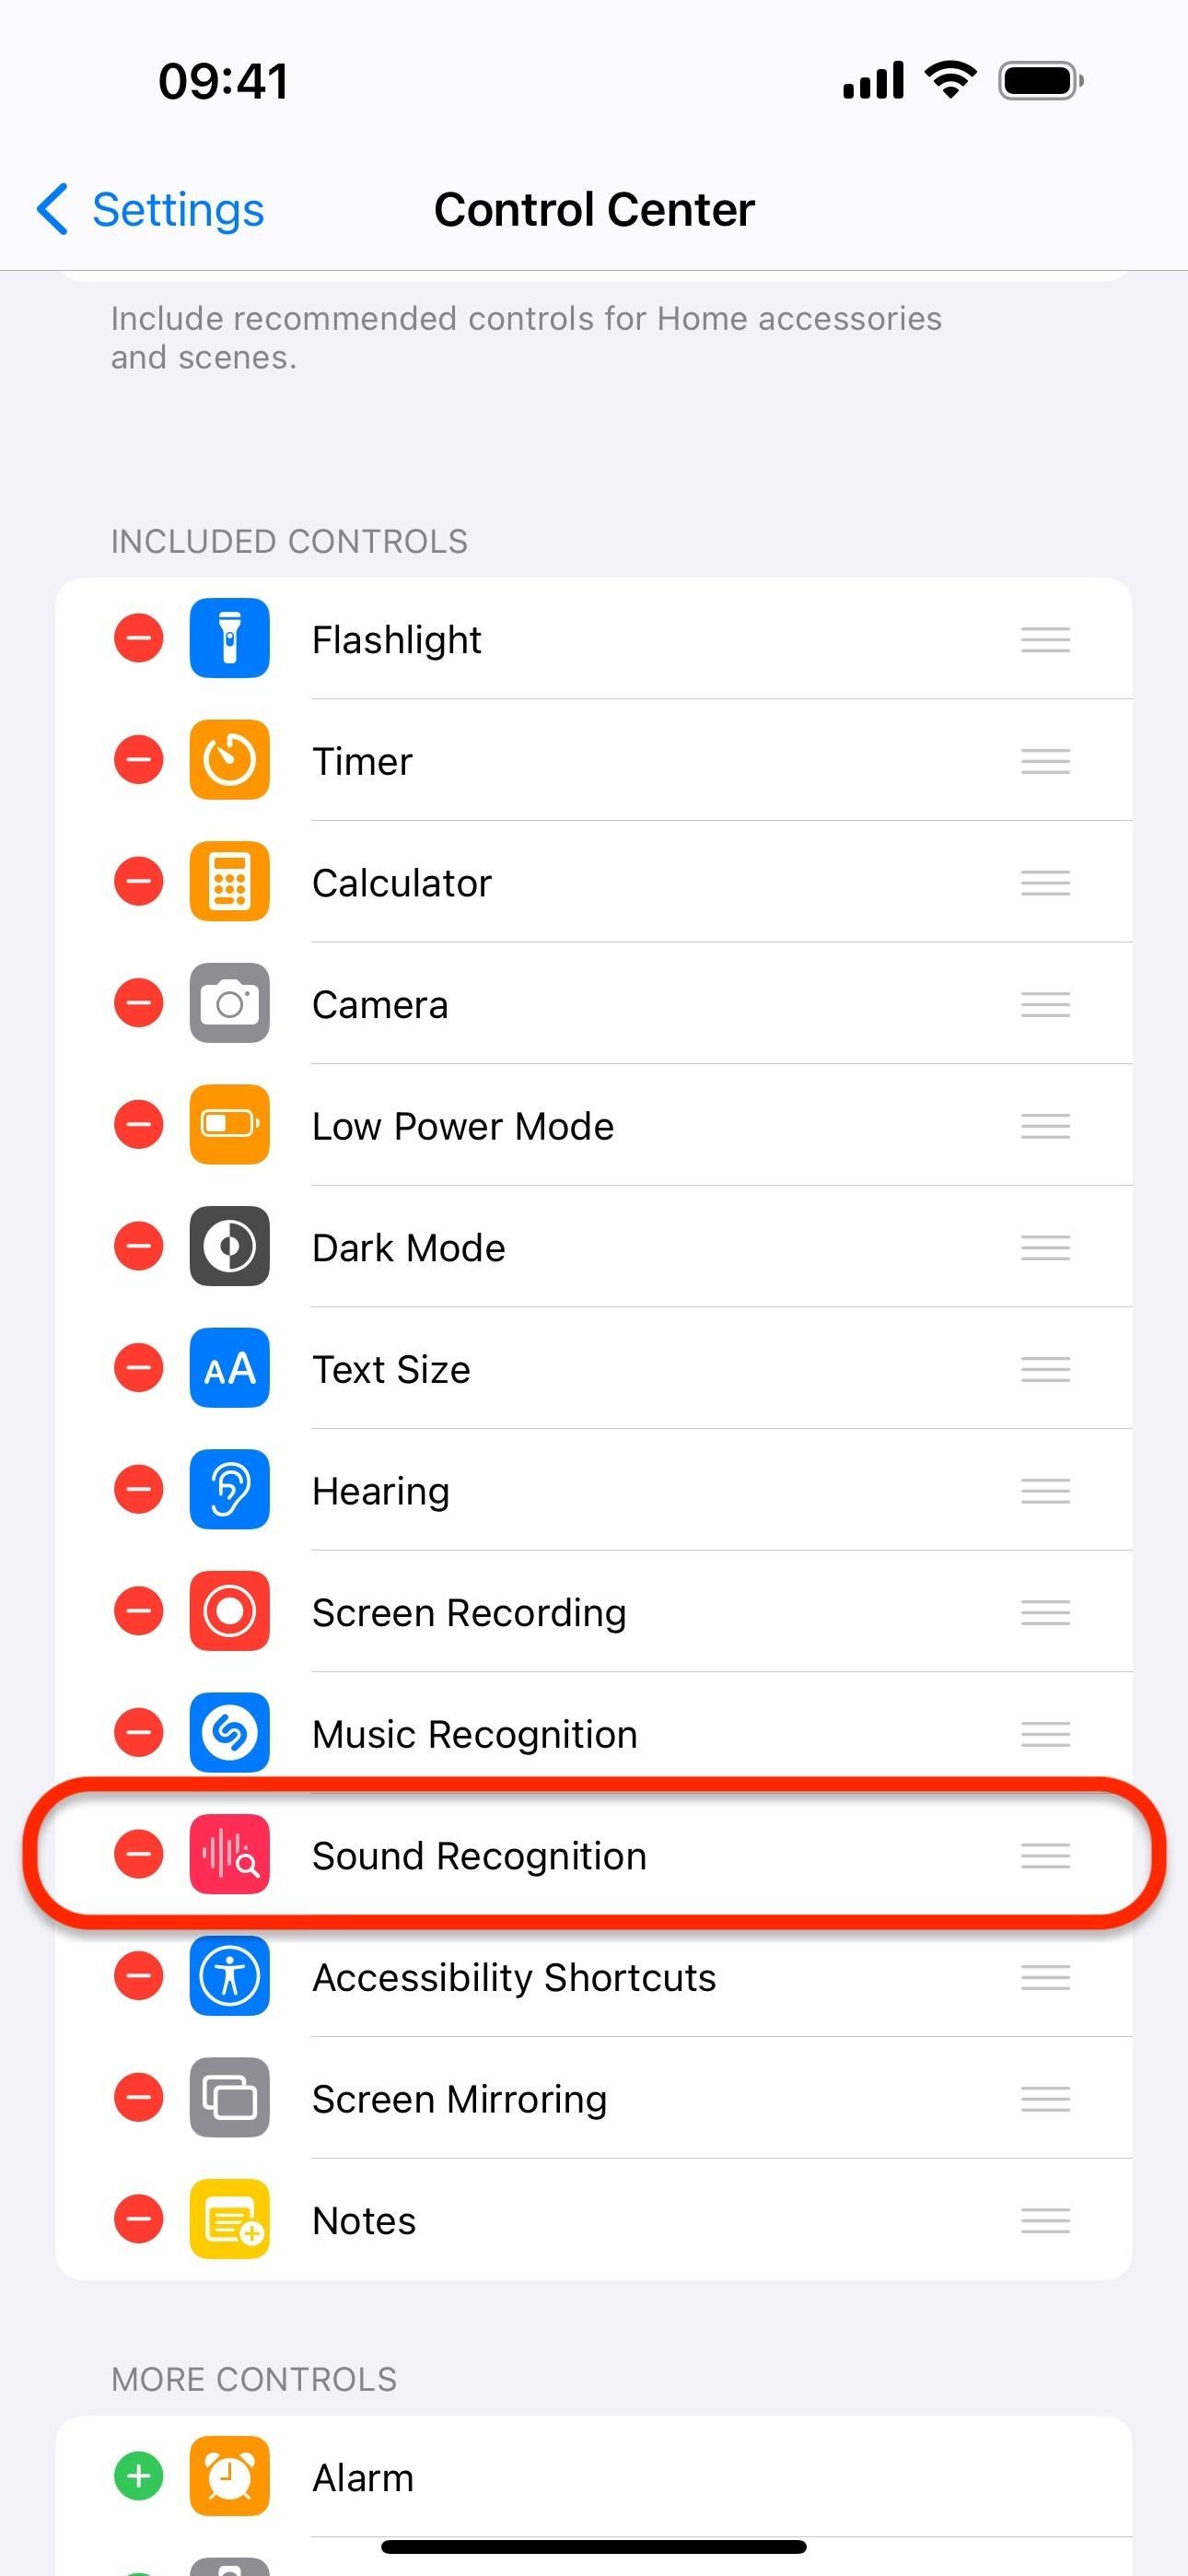 How to Identify Any Song Playing on Instagram, TikTok, and Other Apps on Your iPhone Using Shazam